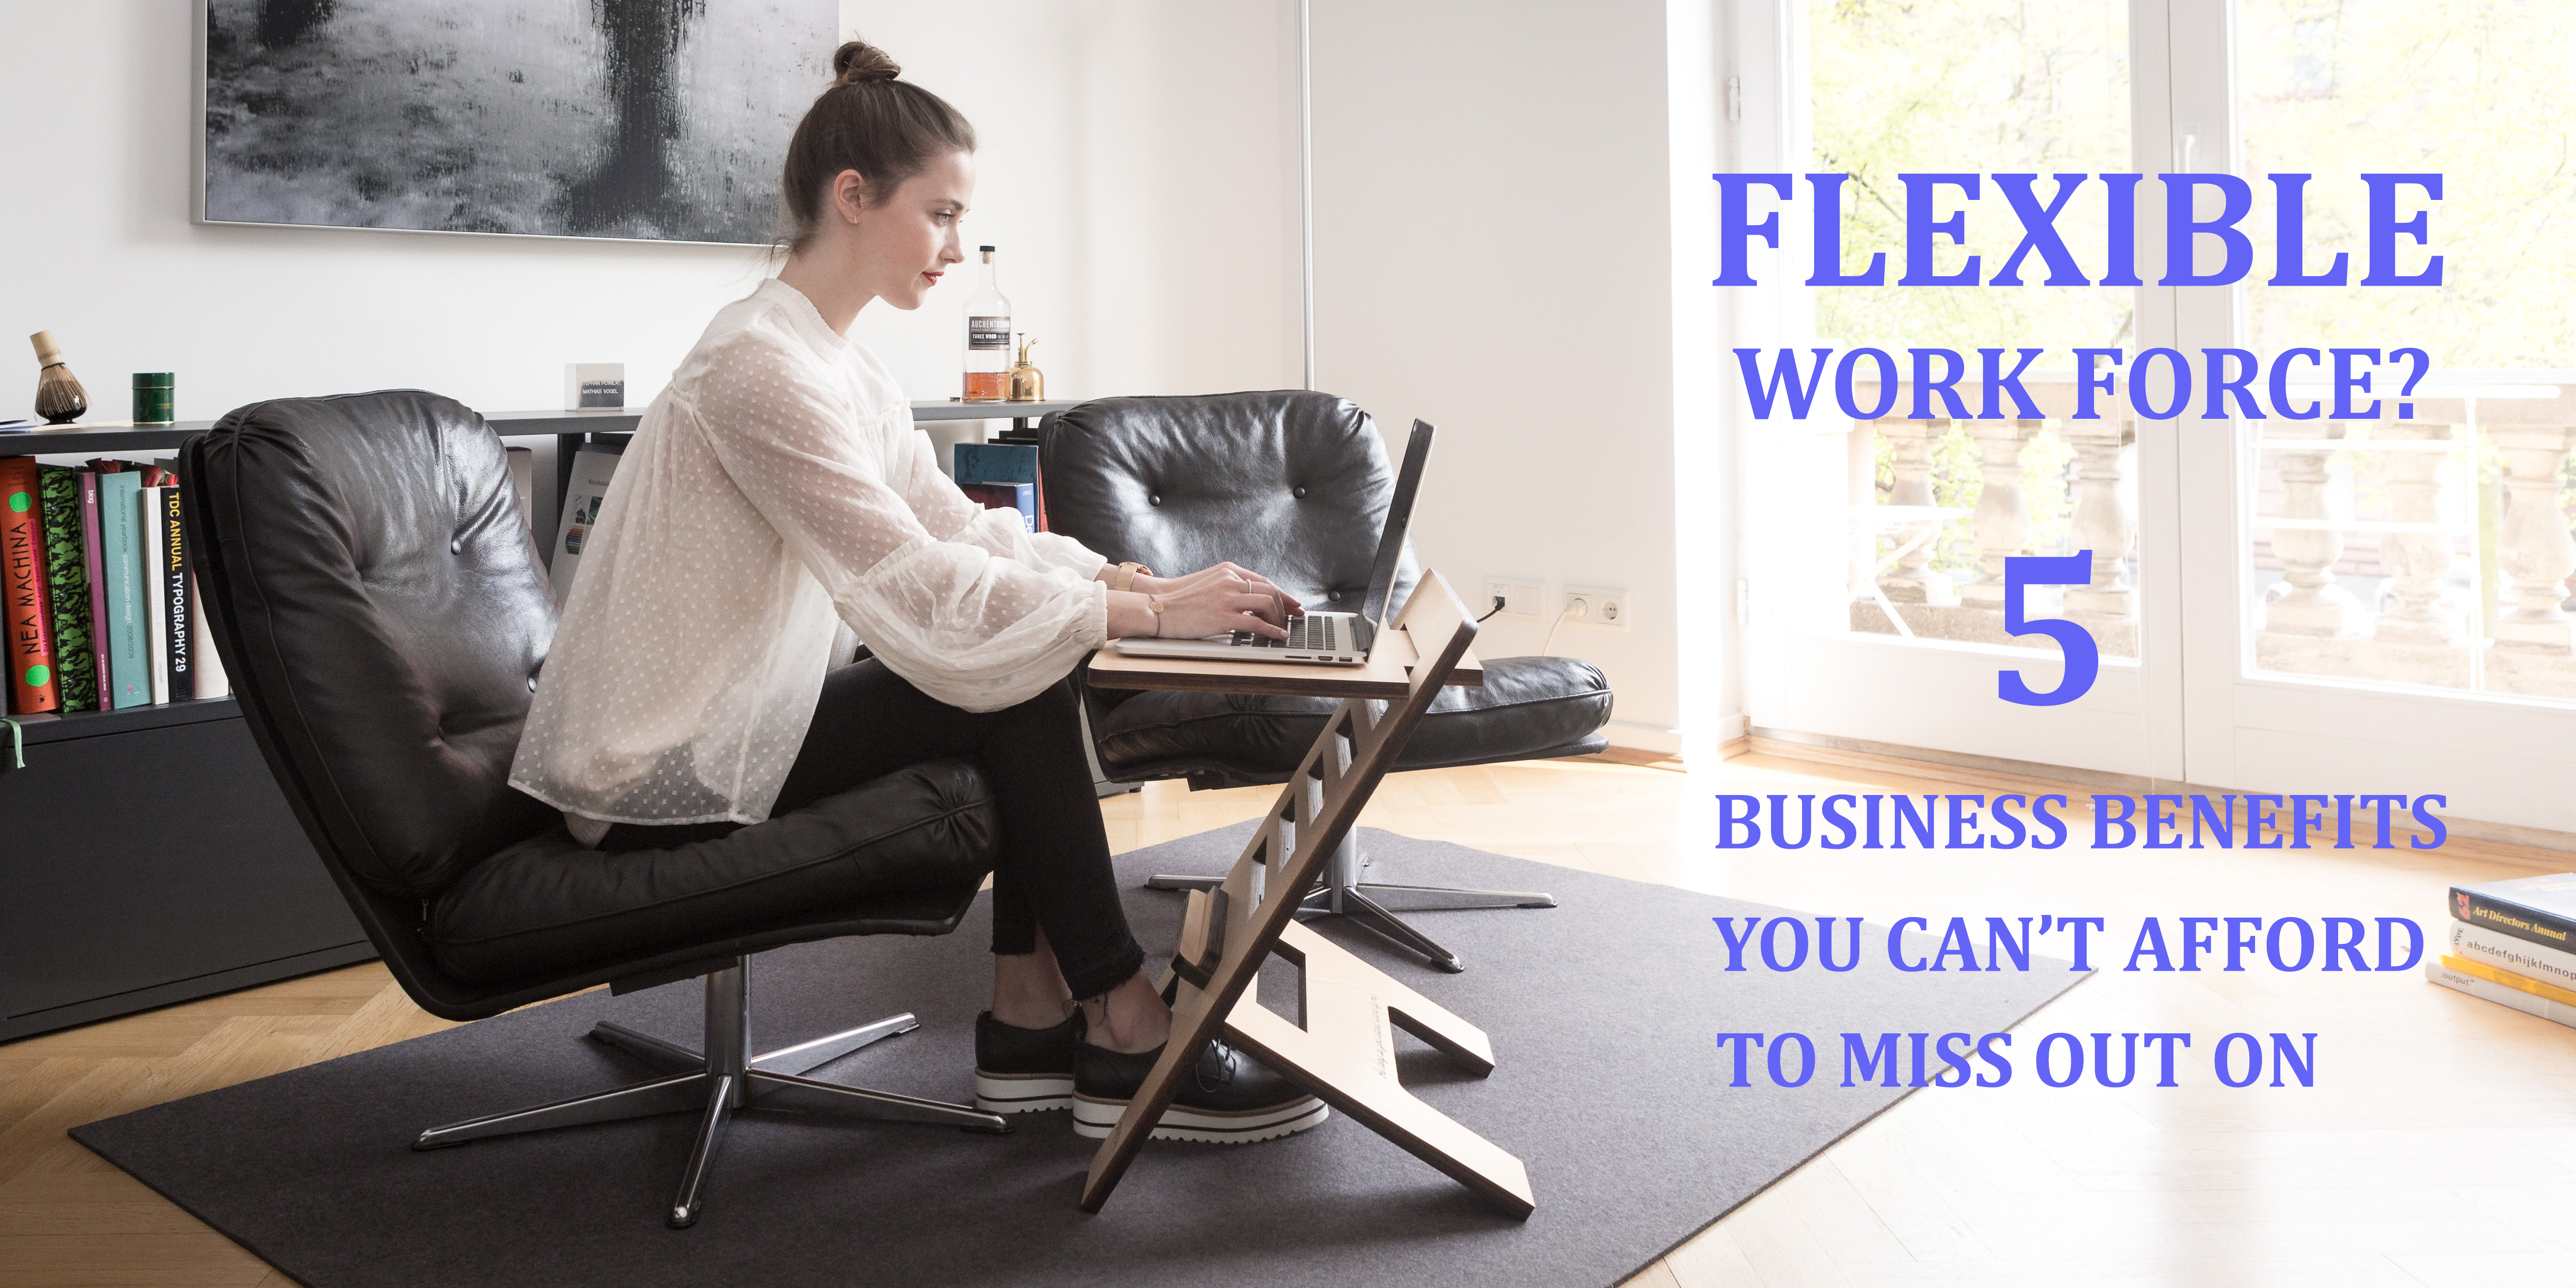 Flexible Work Force During Pandemic: 5 Business Advantages You Can’t Miss Out